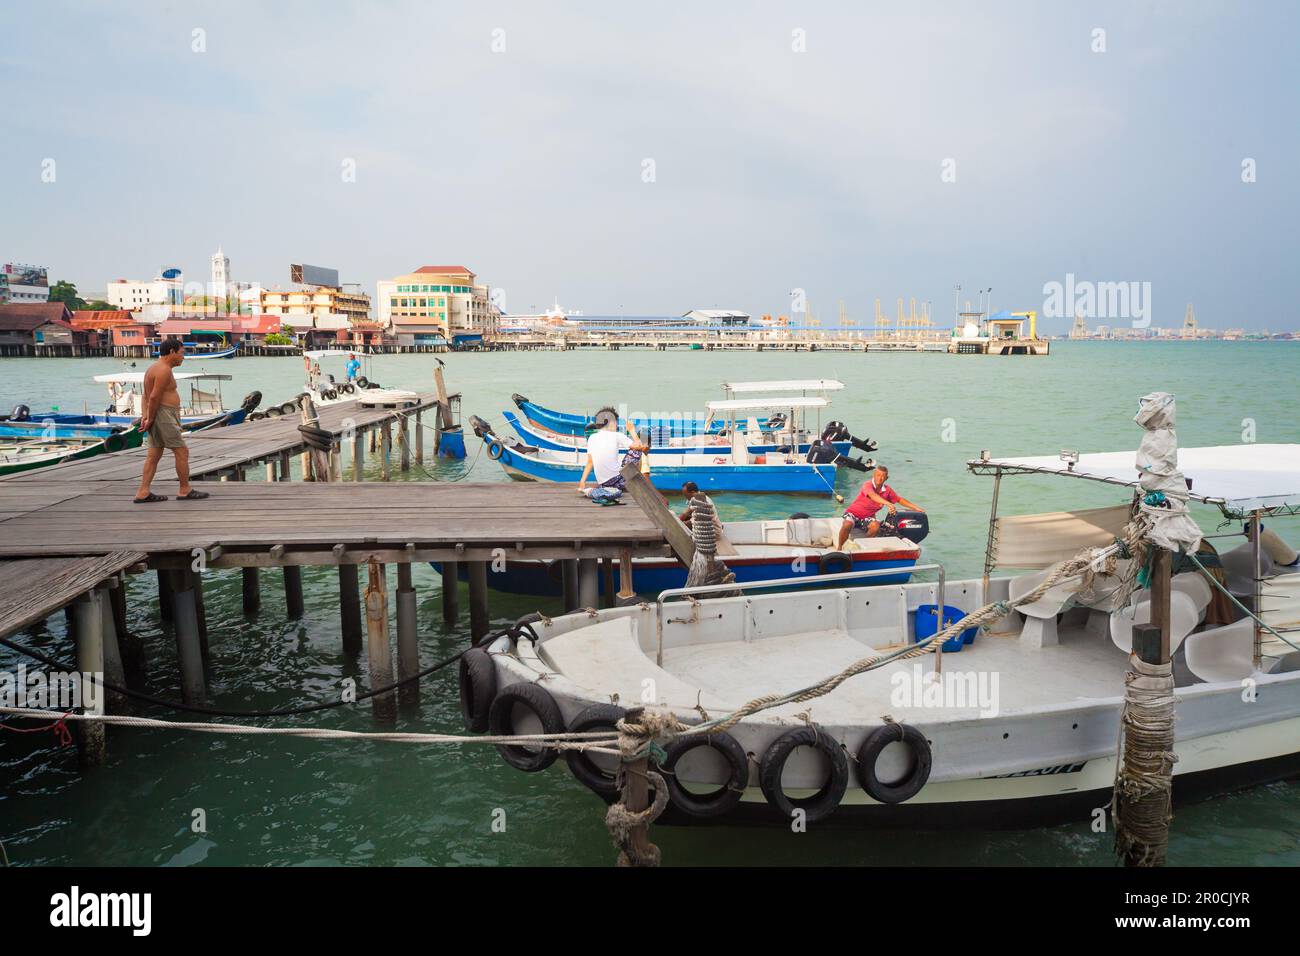 Georgetown, Penang, Malaysia - September 03, 2014: Pier on stilts with boats in Chew Jetty sea floating village in historical Georgetown, Penang, Stock Photo